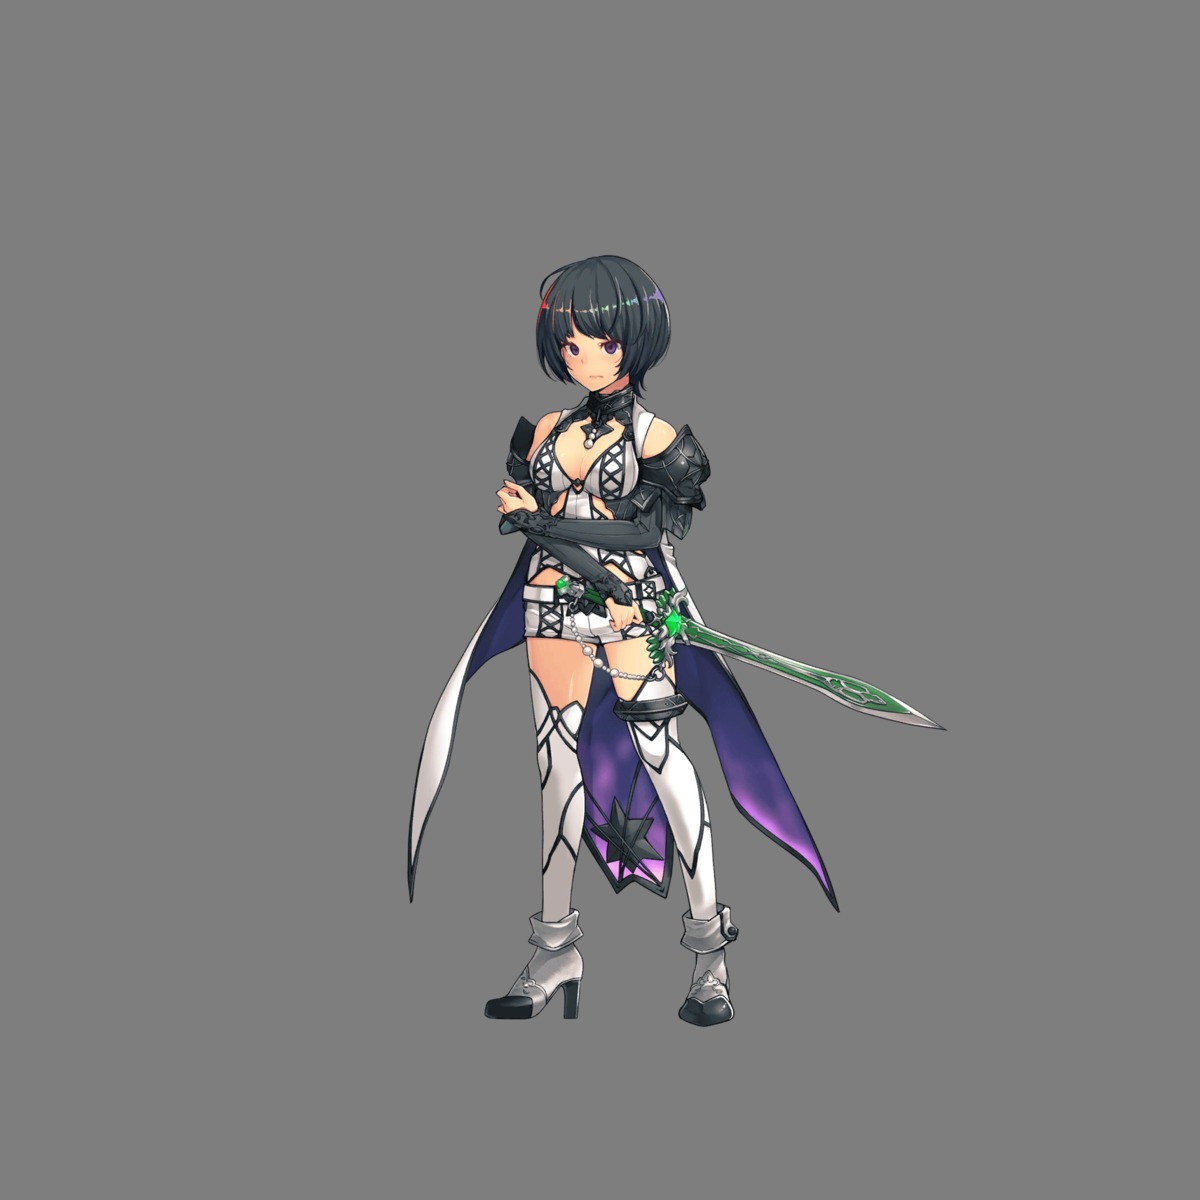 armor cleavage heels hoshi_no_girls_odyssey sword thighhighs transparent_png